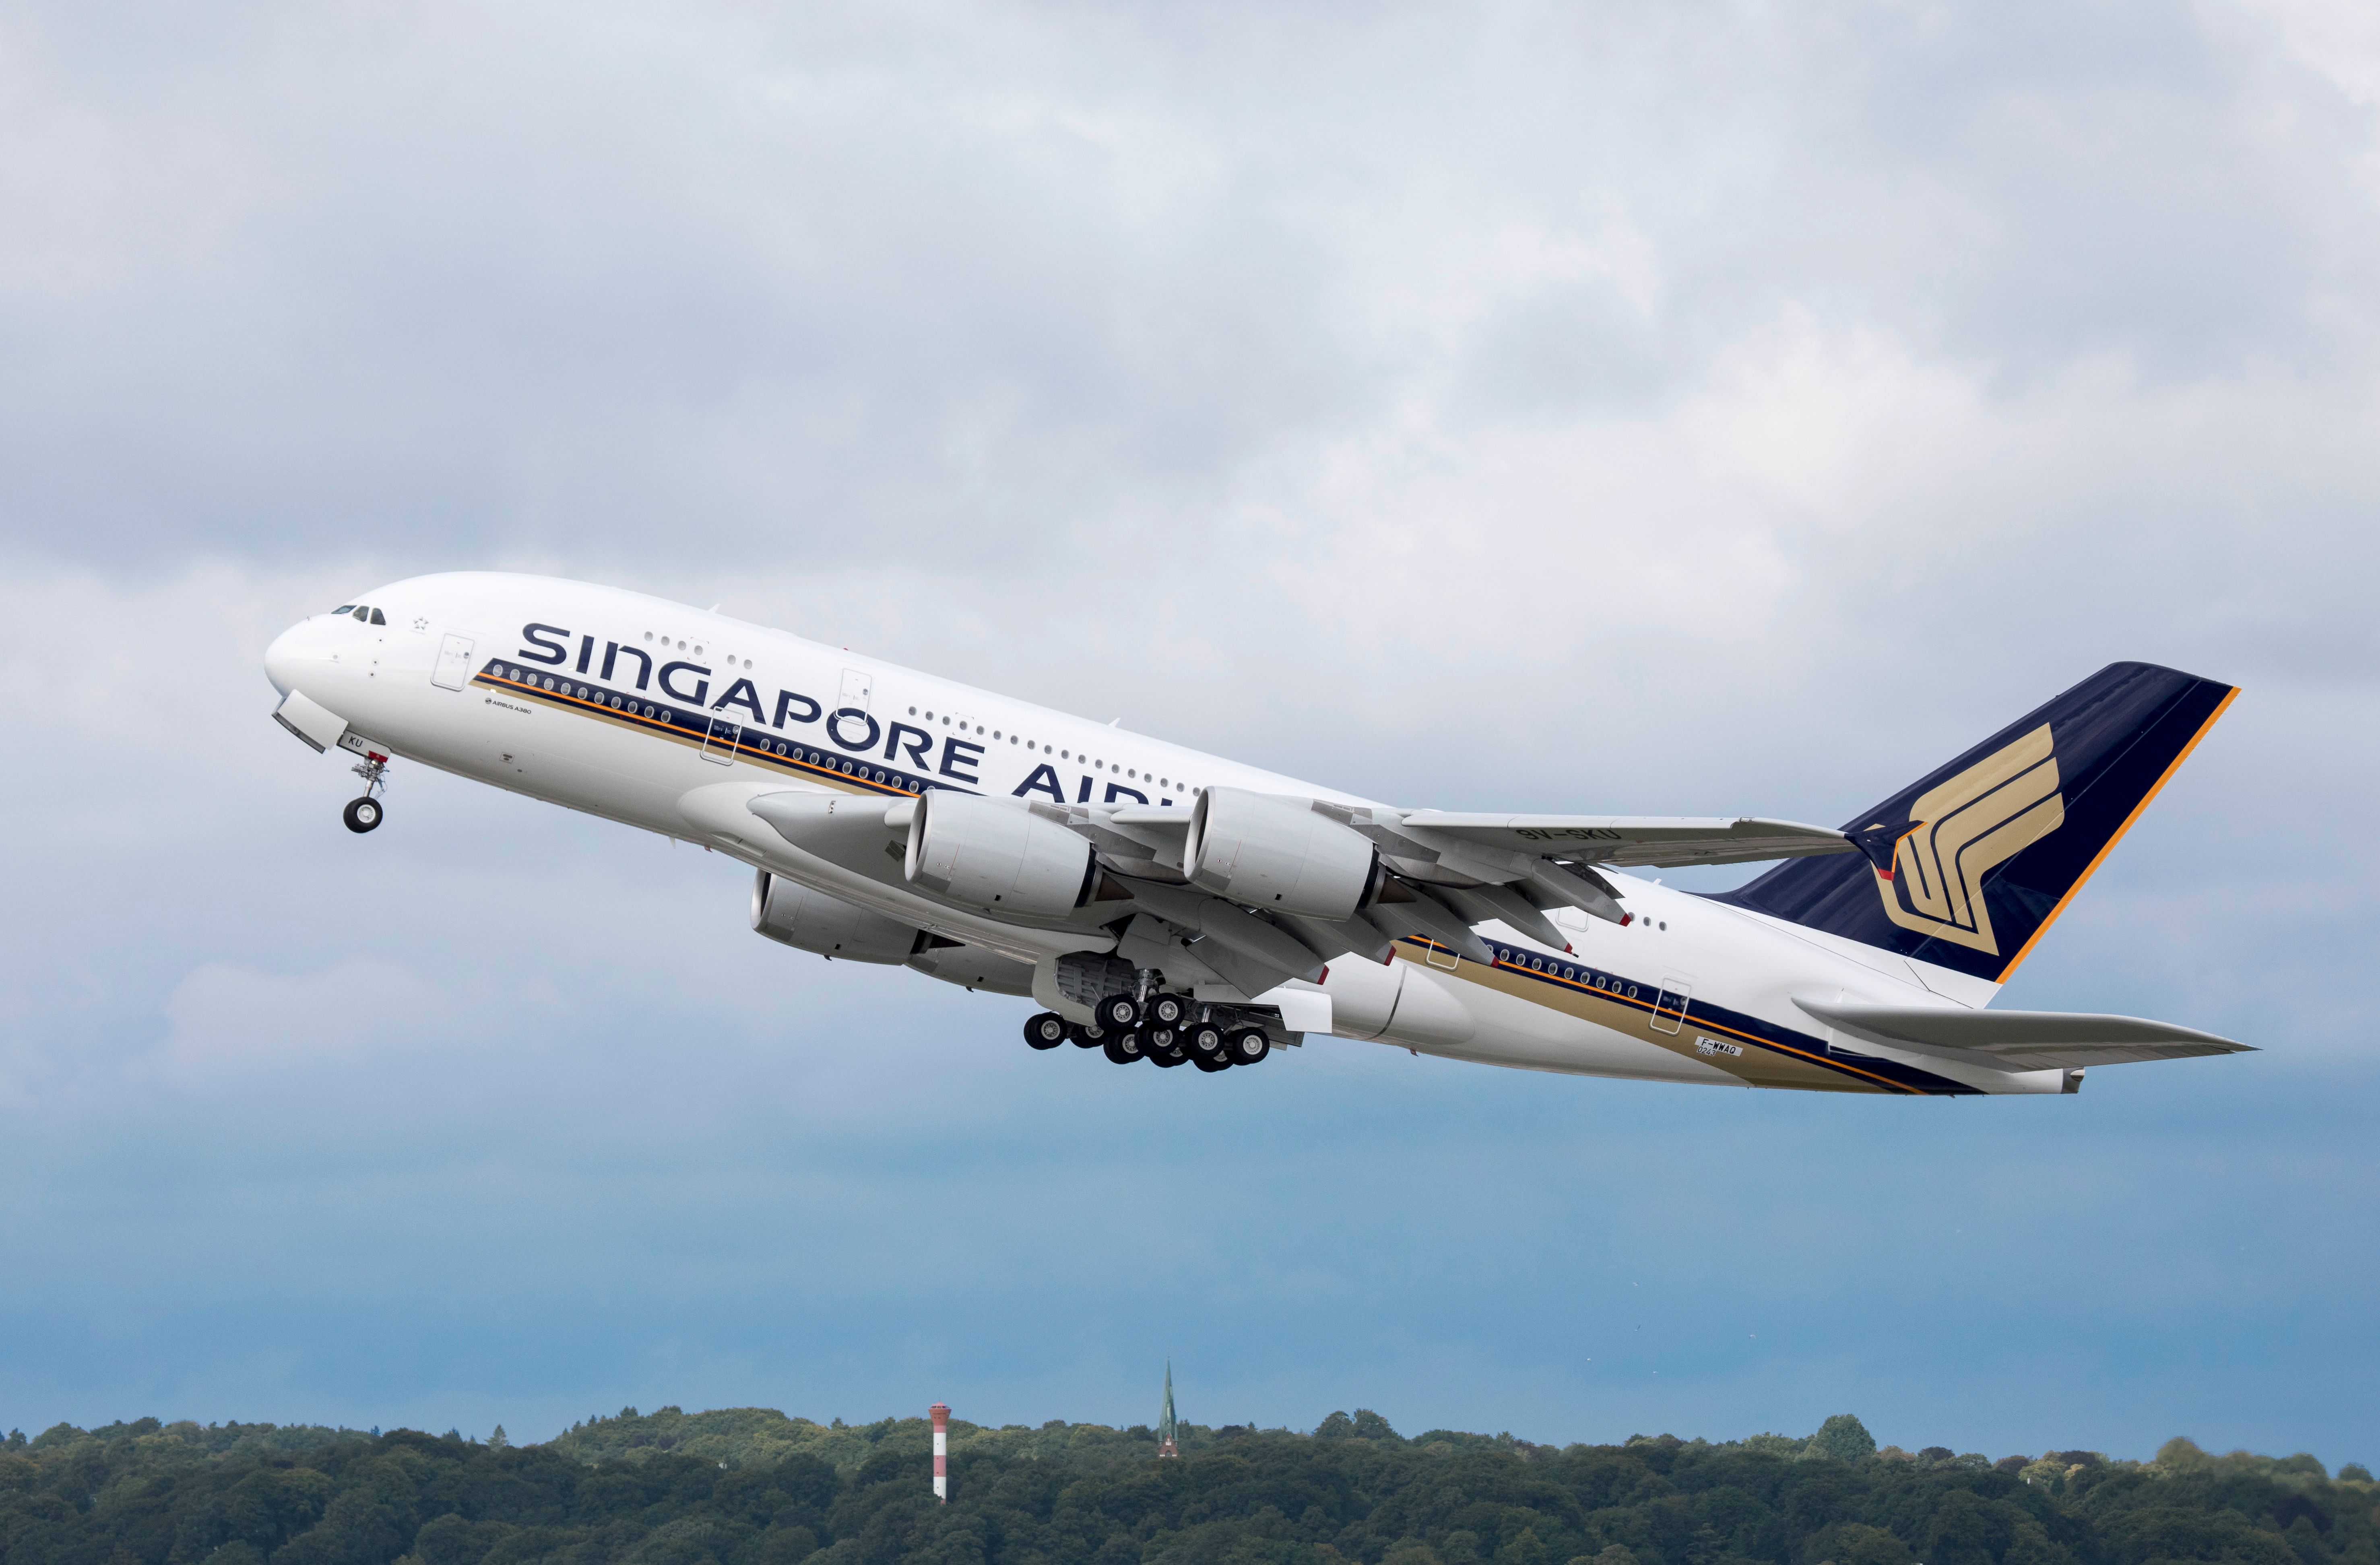 A380 SIA Singapore Airlines taking off